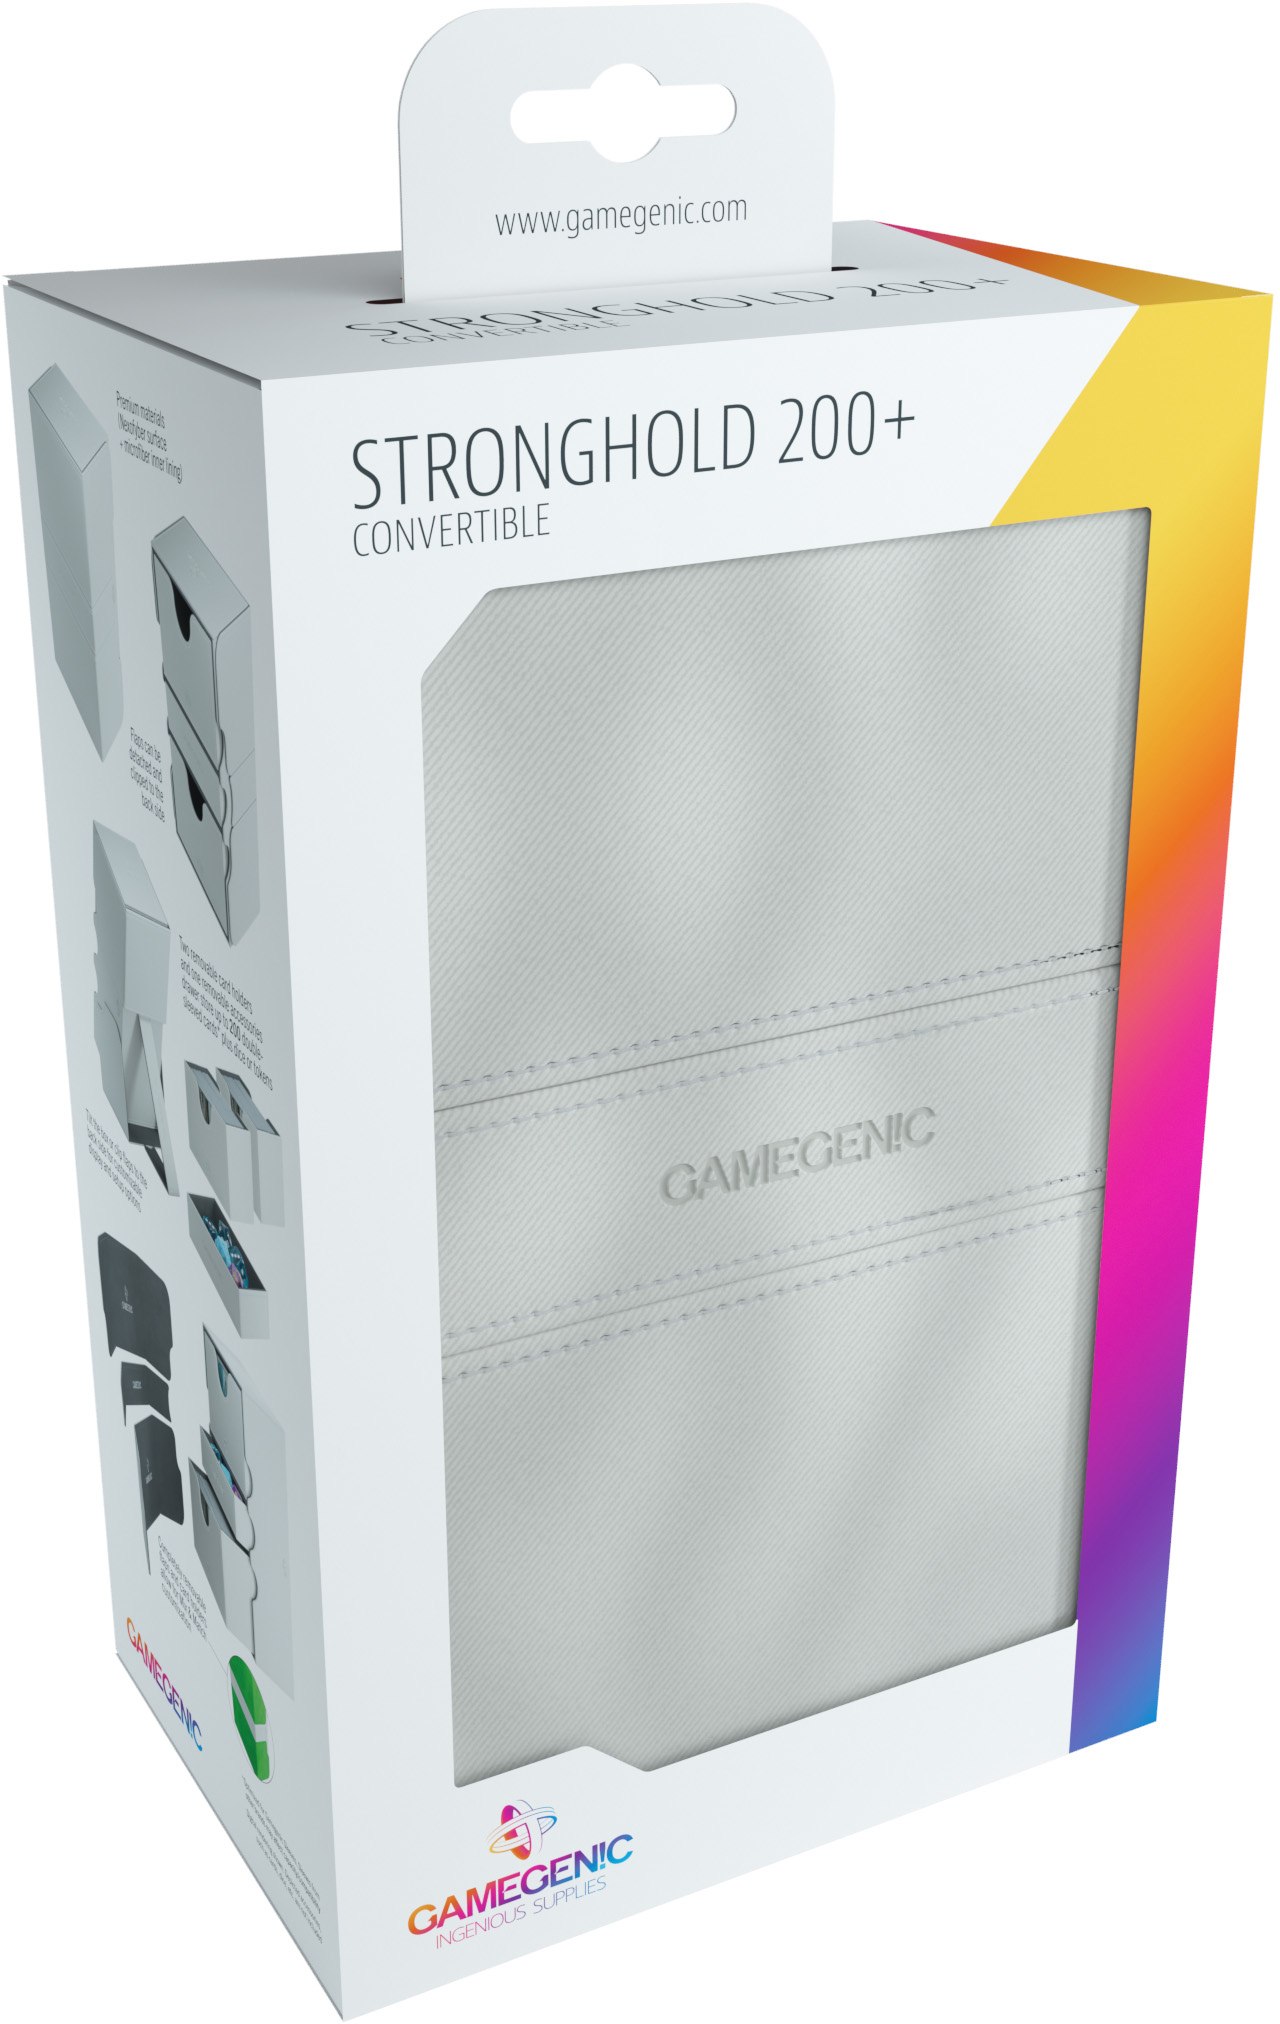 STRONGHOLD 200+ CONVERTIBLE - Gamegenic